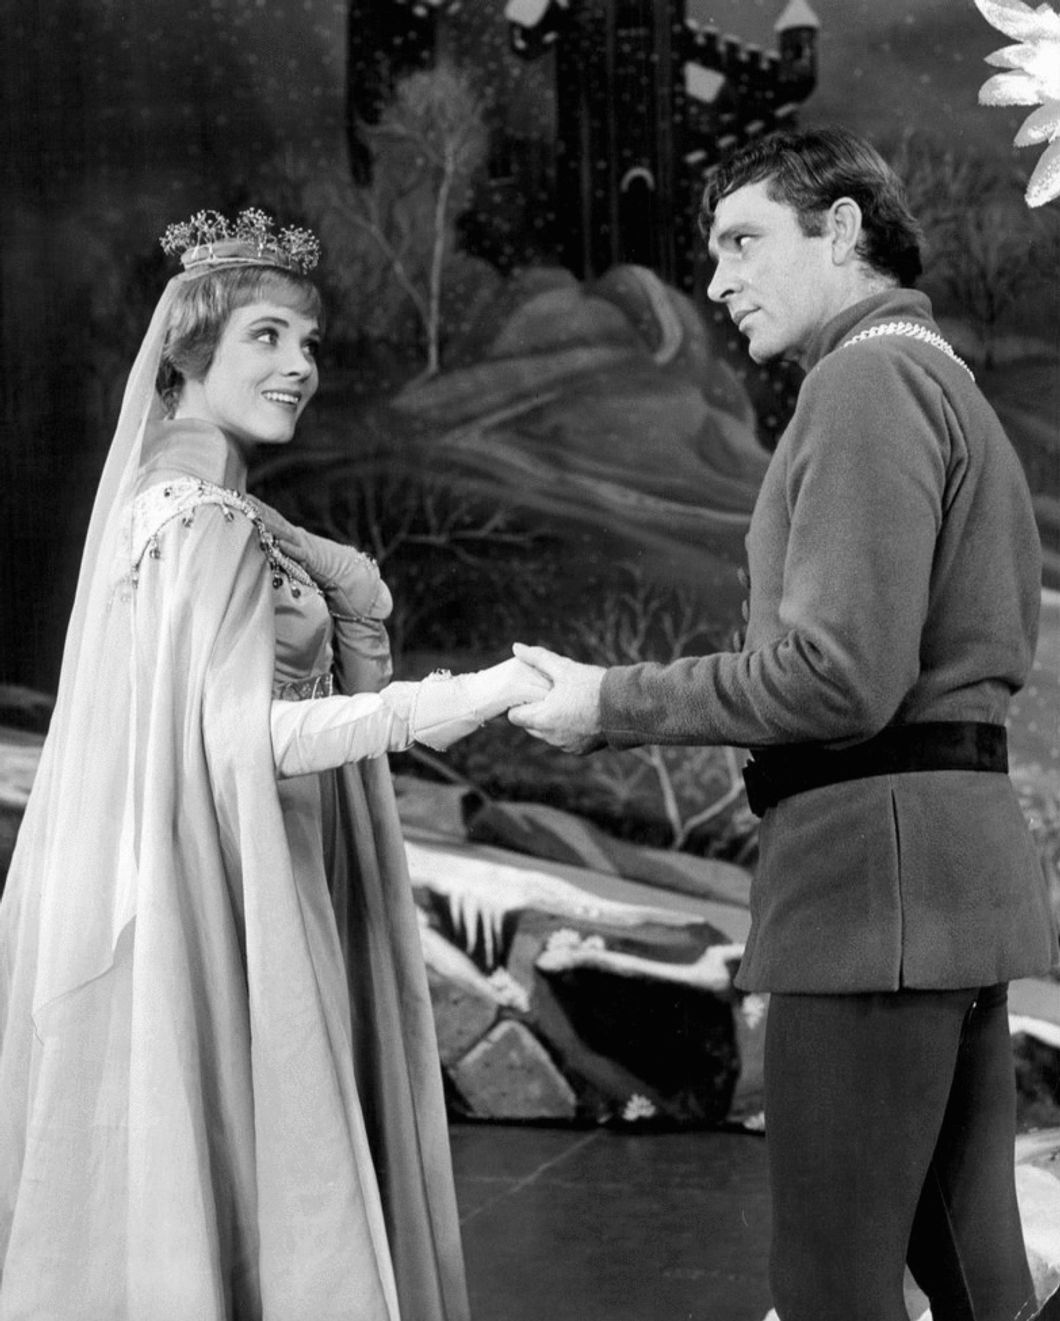 The Musical 'Camelot' Was A Great Source Of Hope In The '60s; Perhaps It Can Be So Today